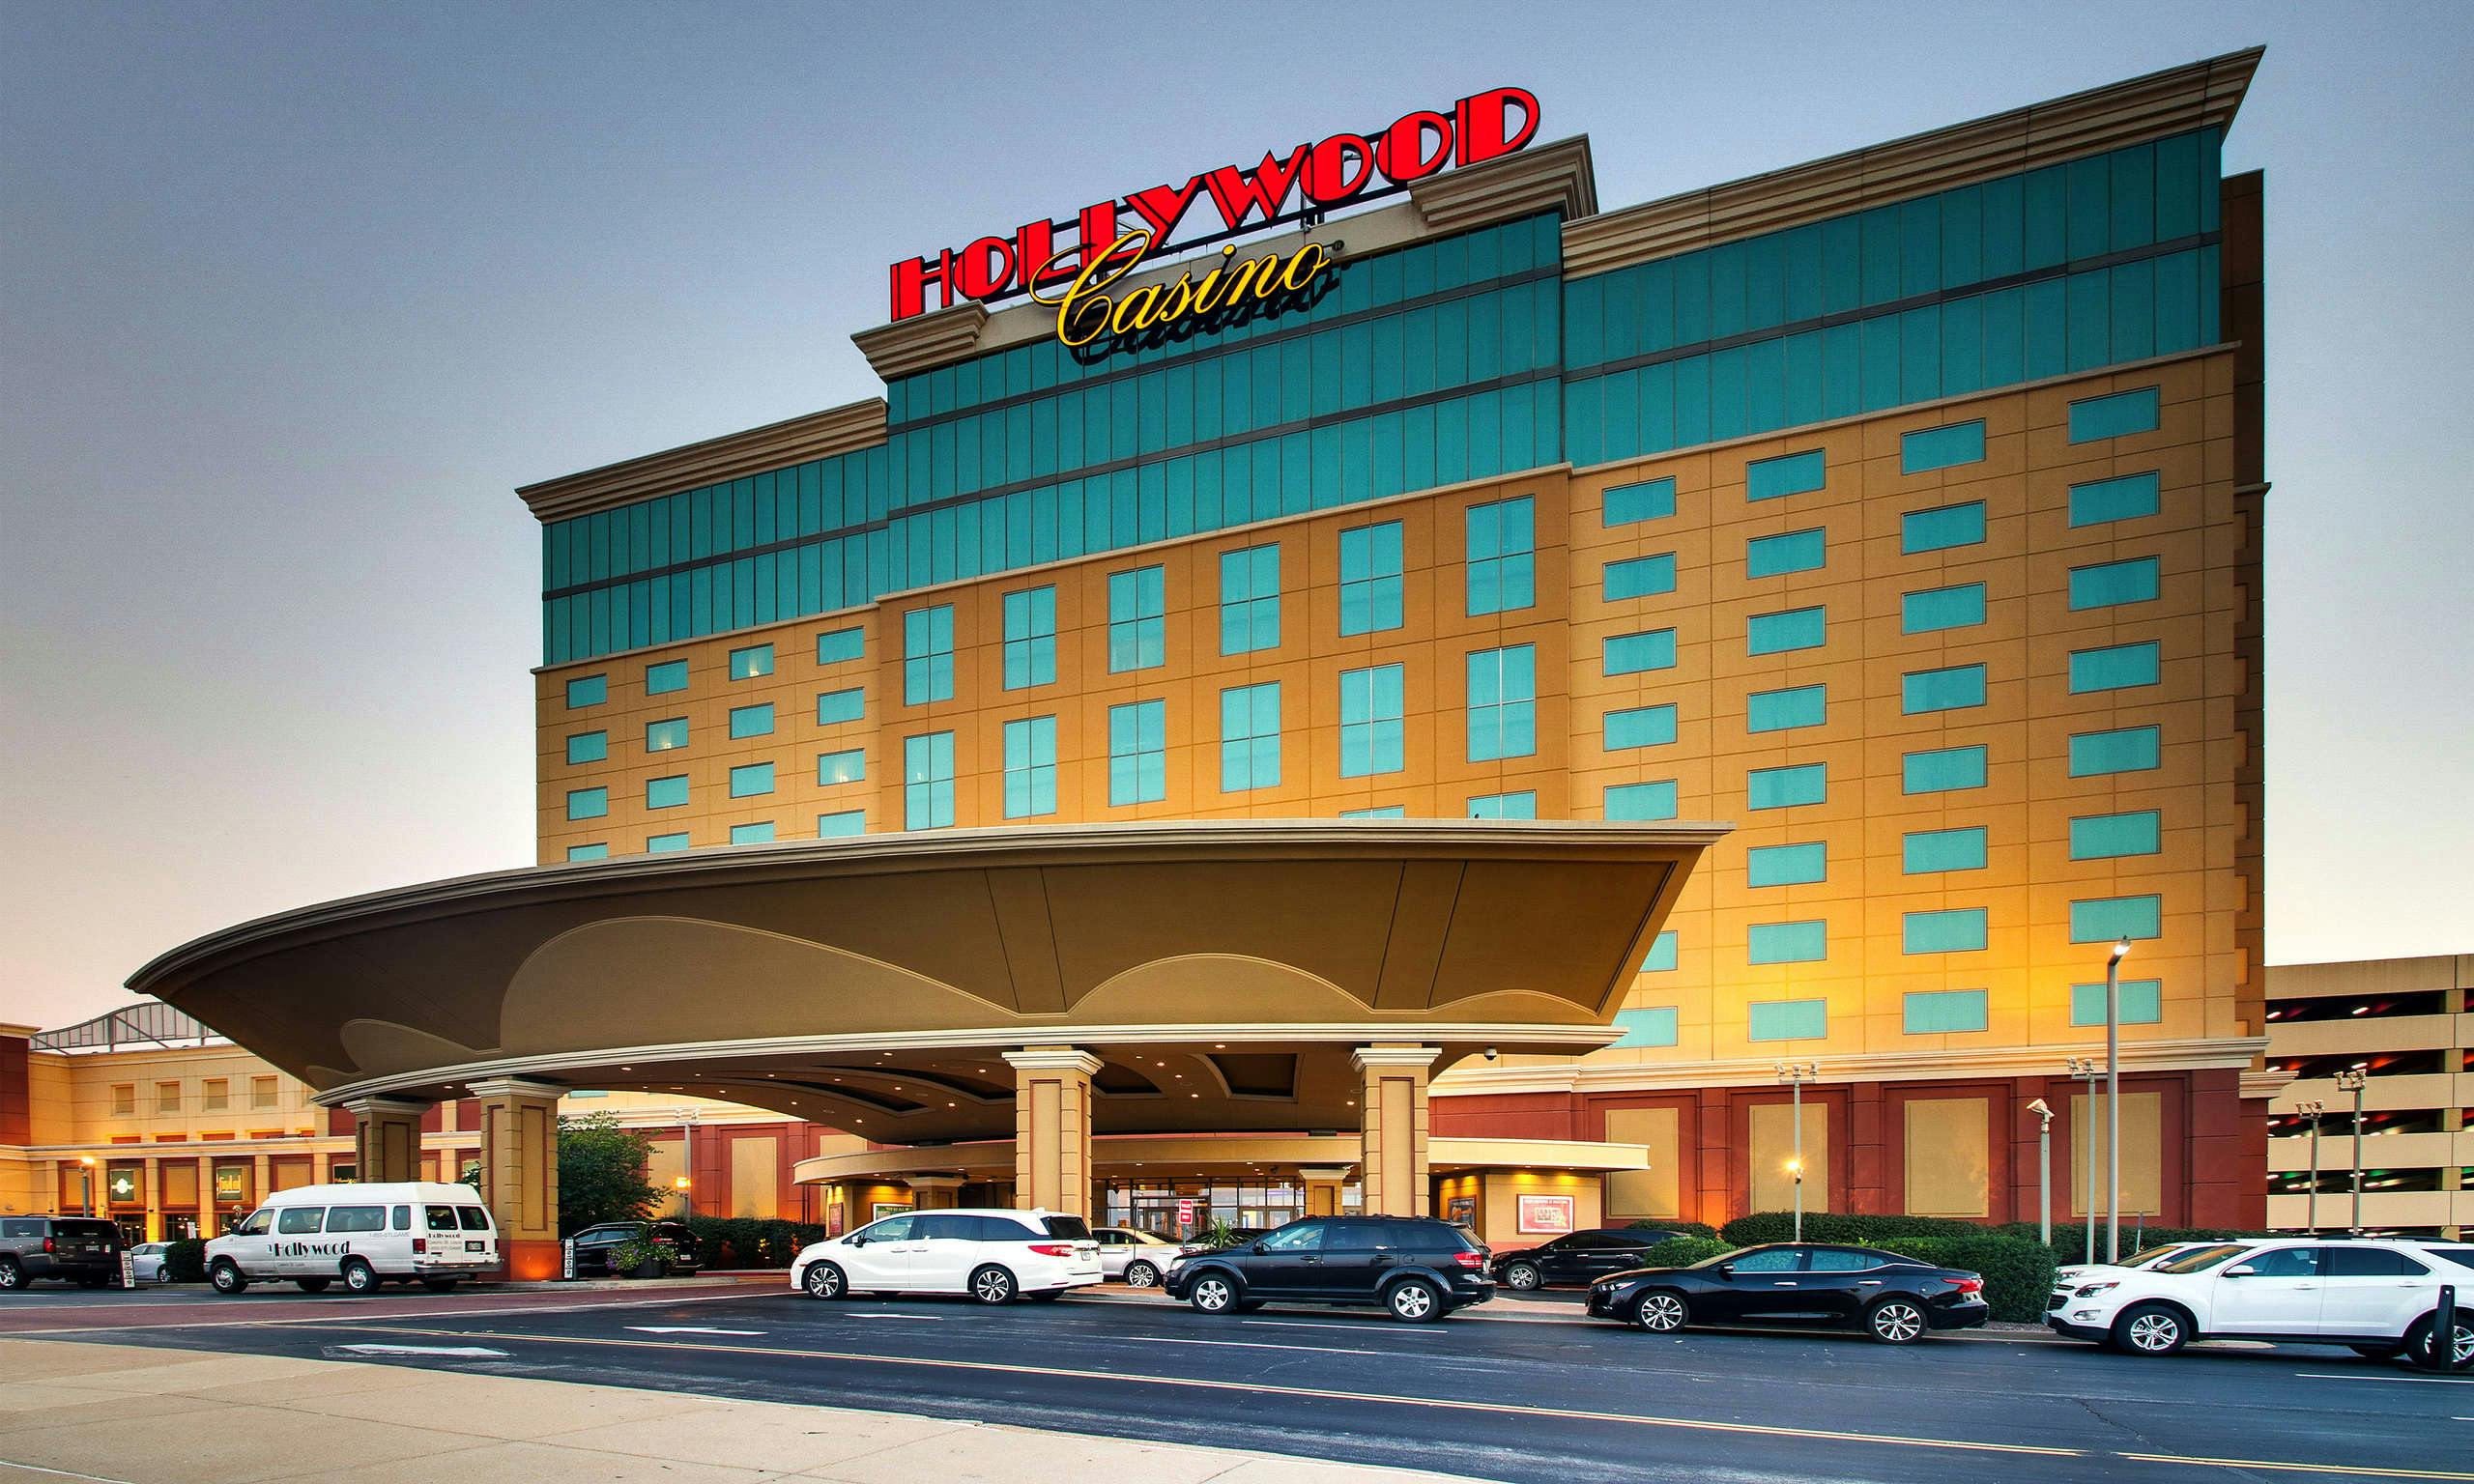 hollywood casino hotel bay st louis